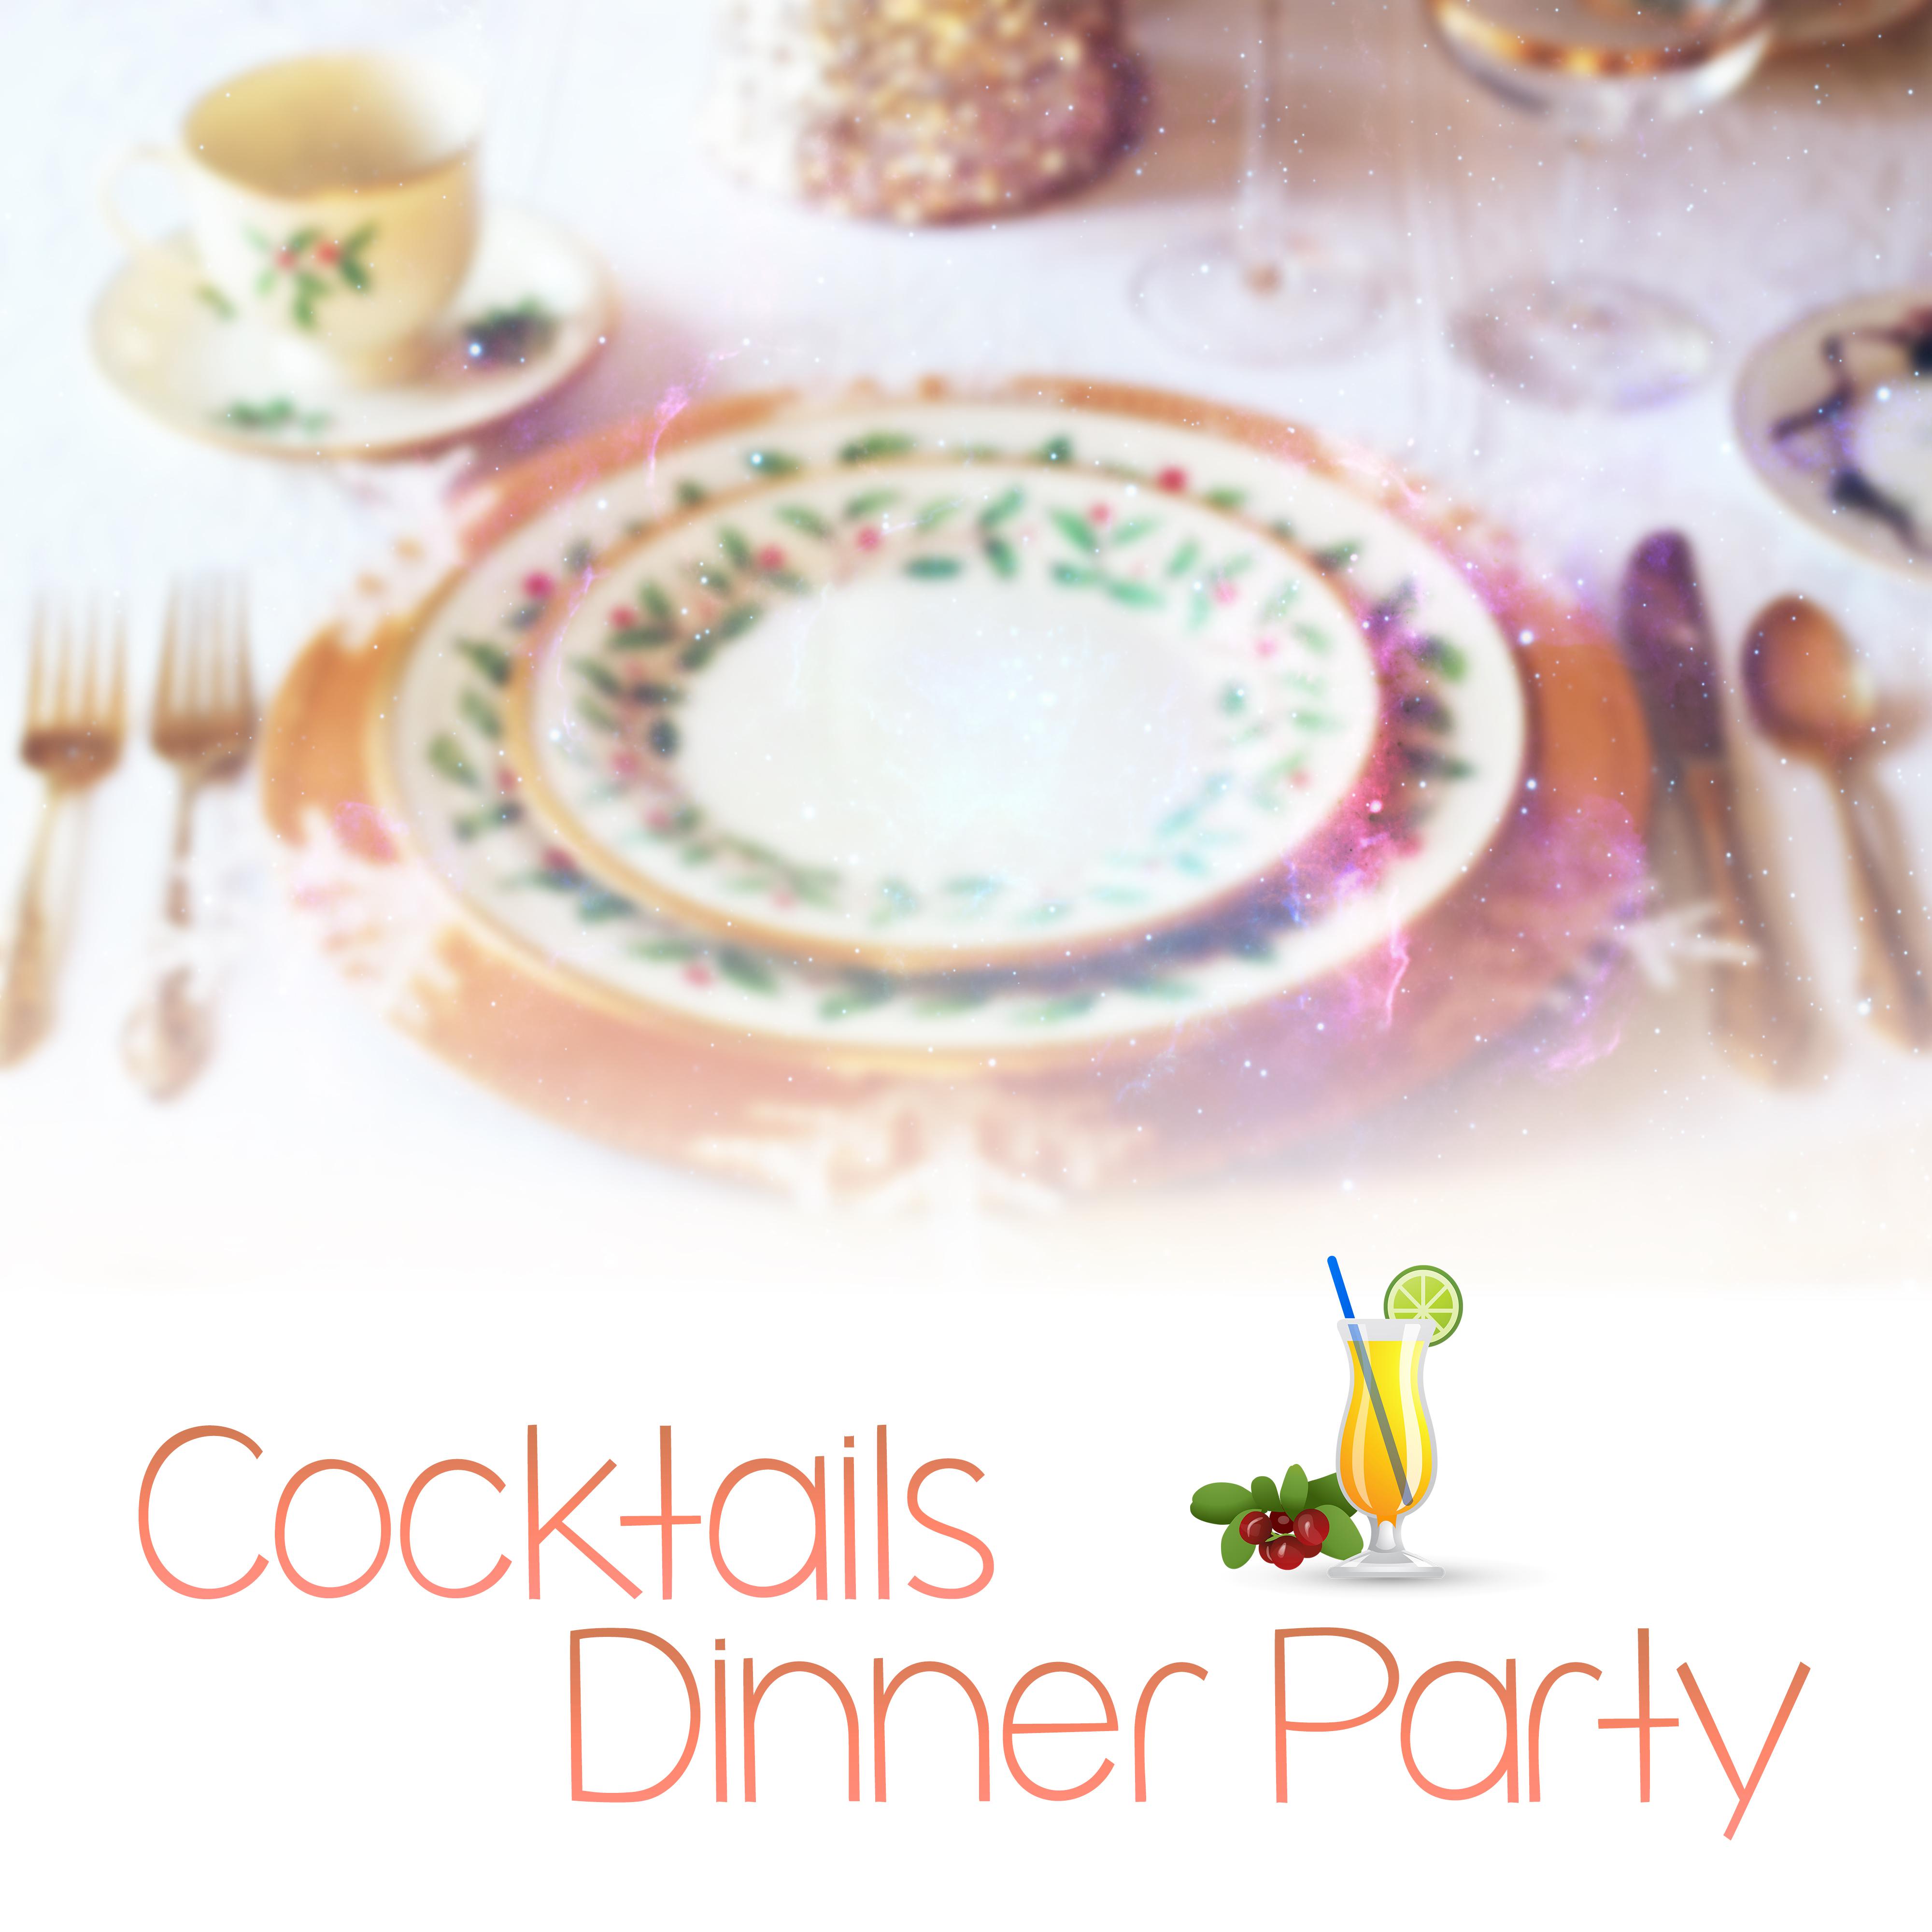 Cocktails Dinner Party – Peaceful Piano Music, Jazz Instrumental, Ambient Music, Dinner Music, Relaxed Jazz